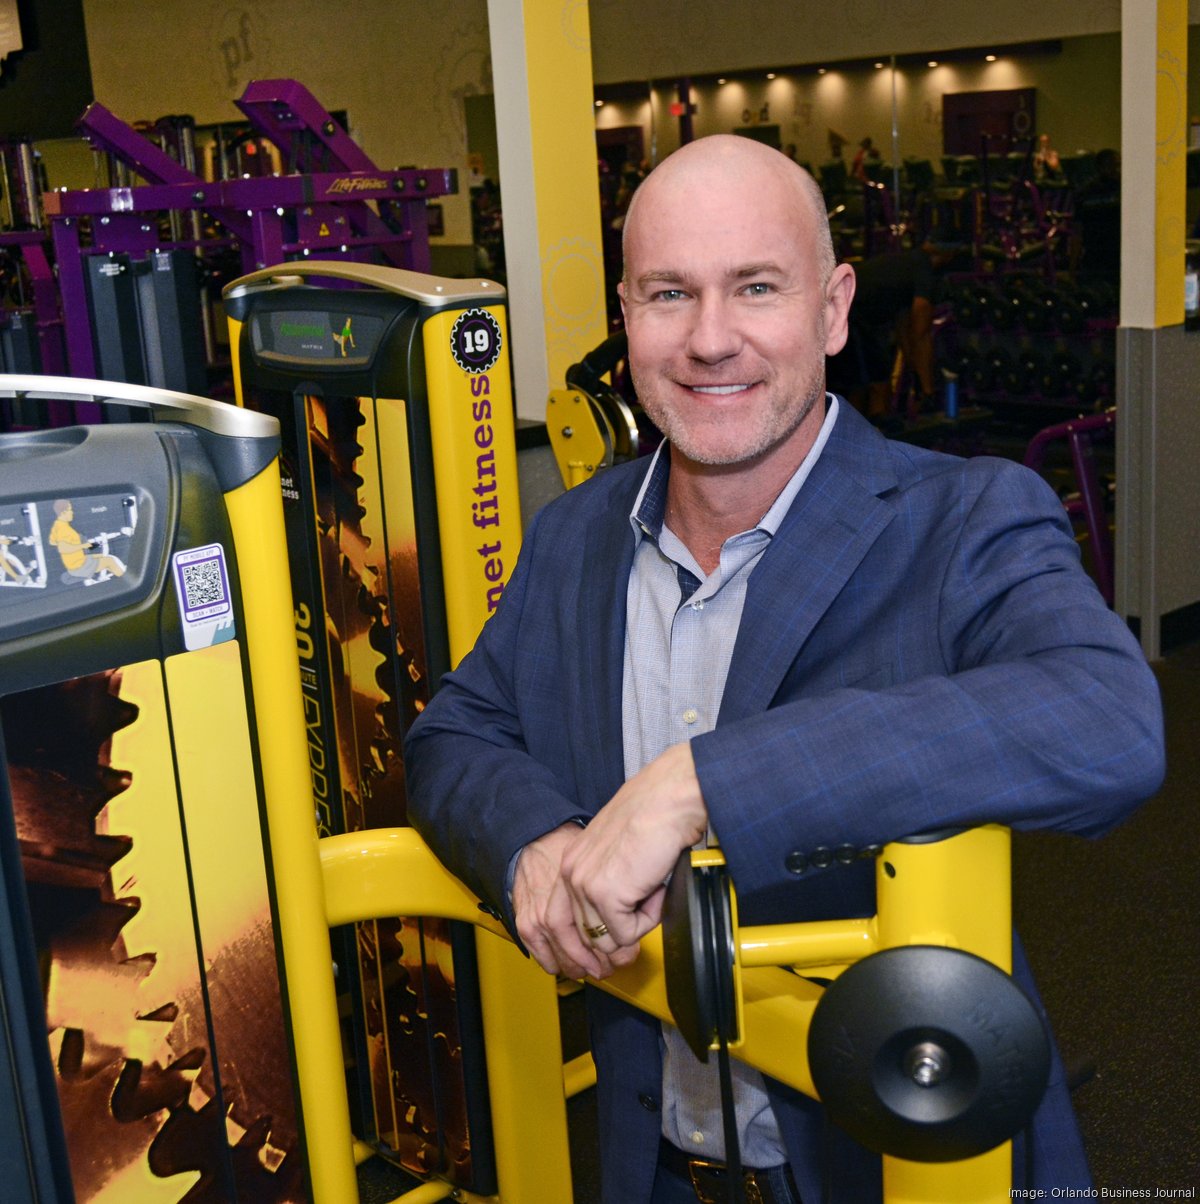 Planet Fitness parent Sunshine Fitness Growth Holdings hits growth